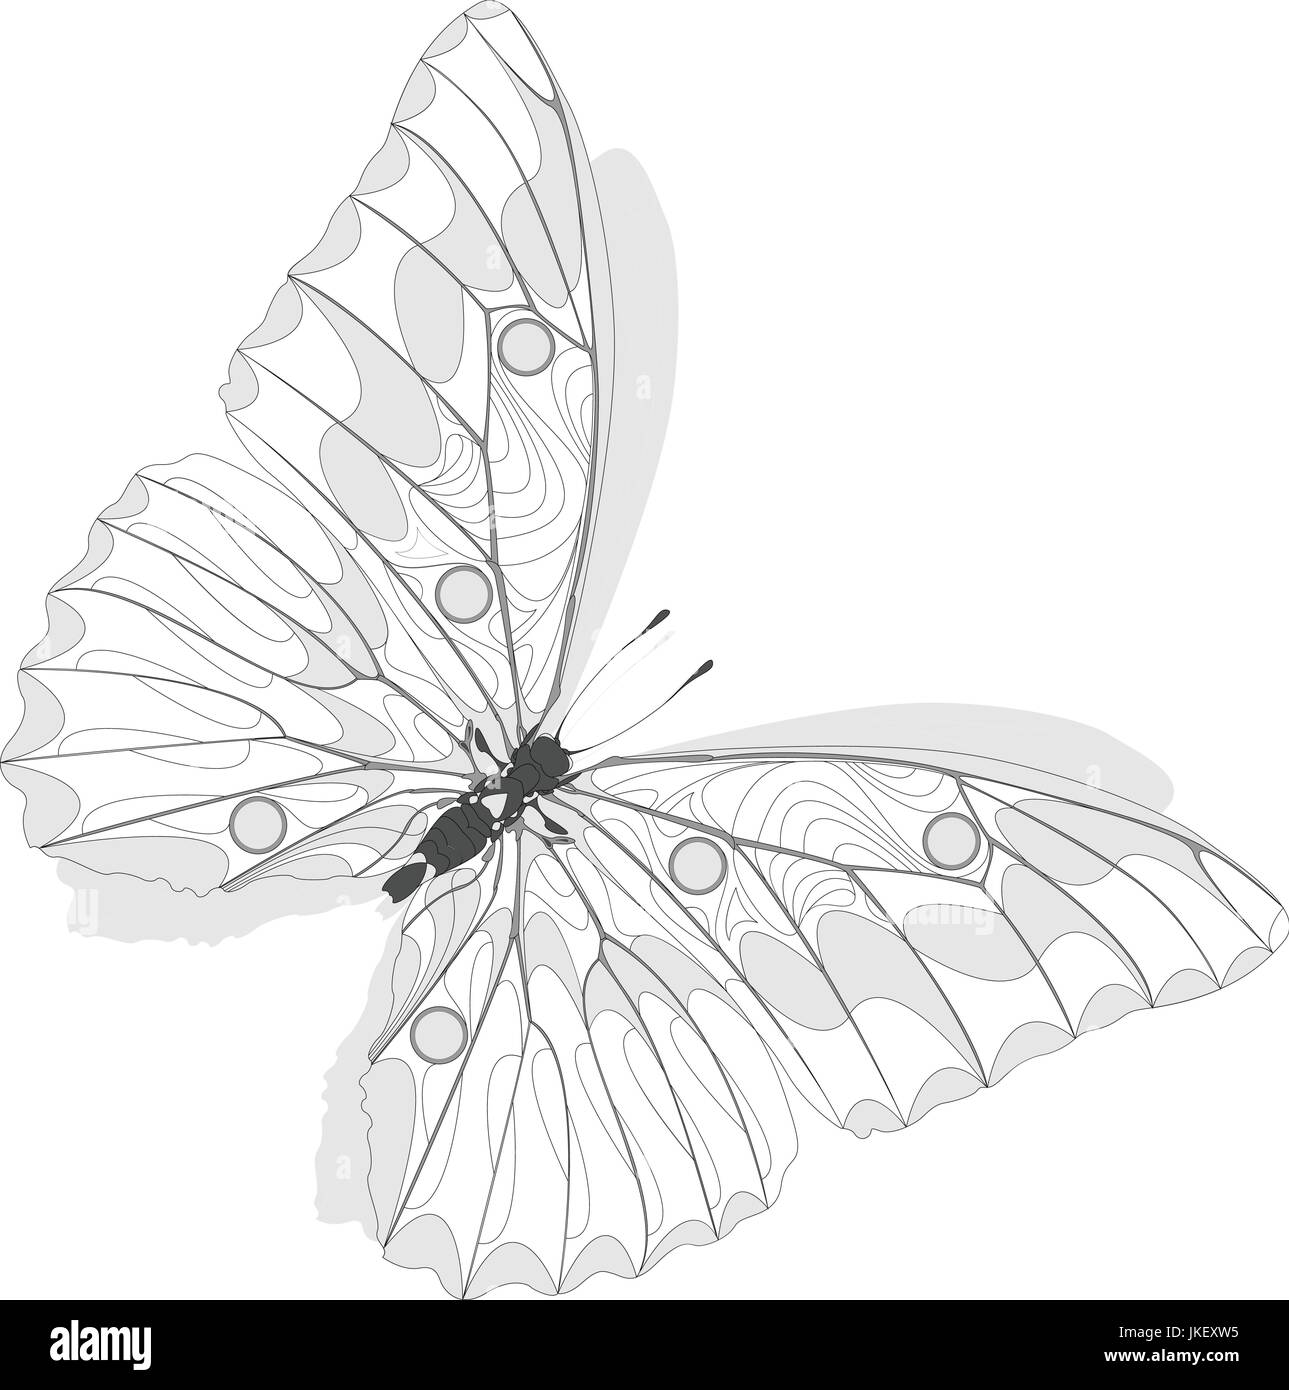 Hand drawn butterfly zentangle style for coloring book shirt design or tattoo stock vector image art